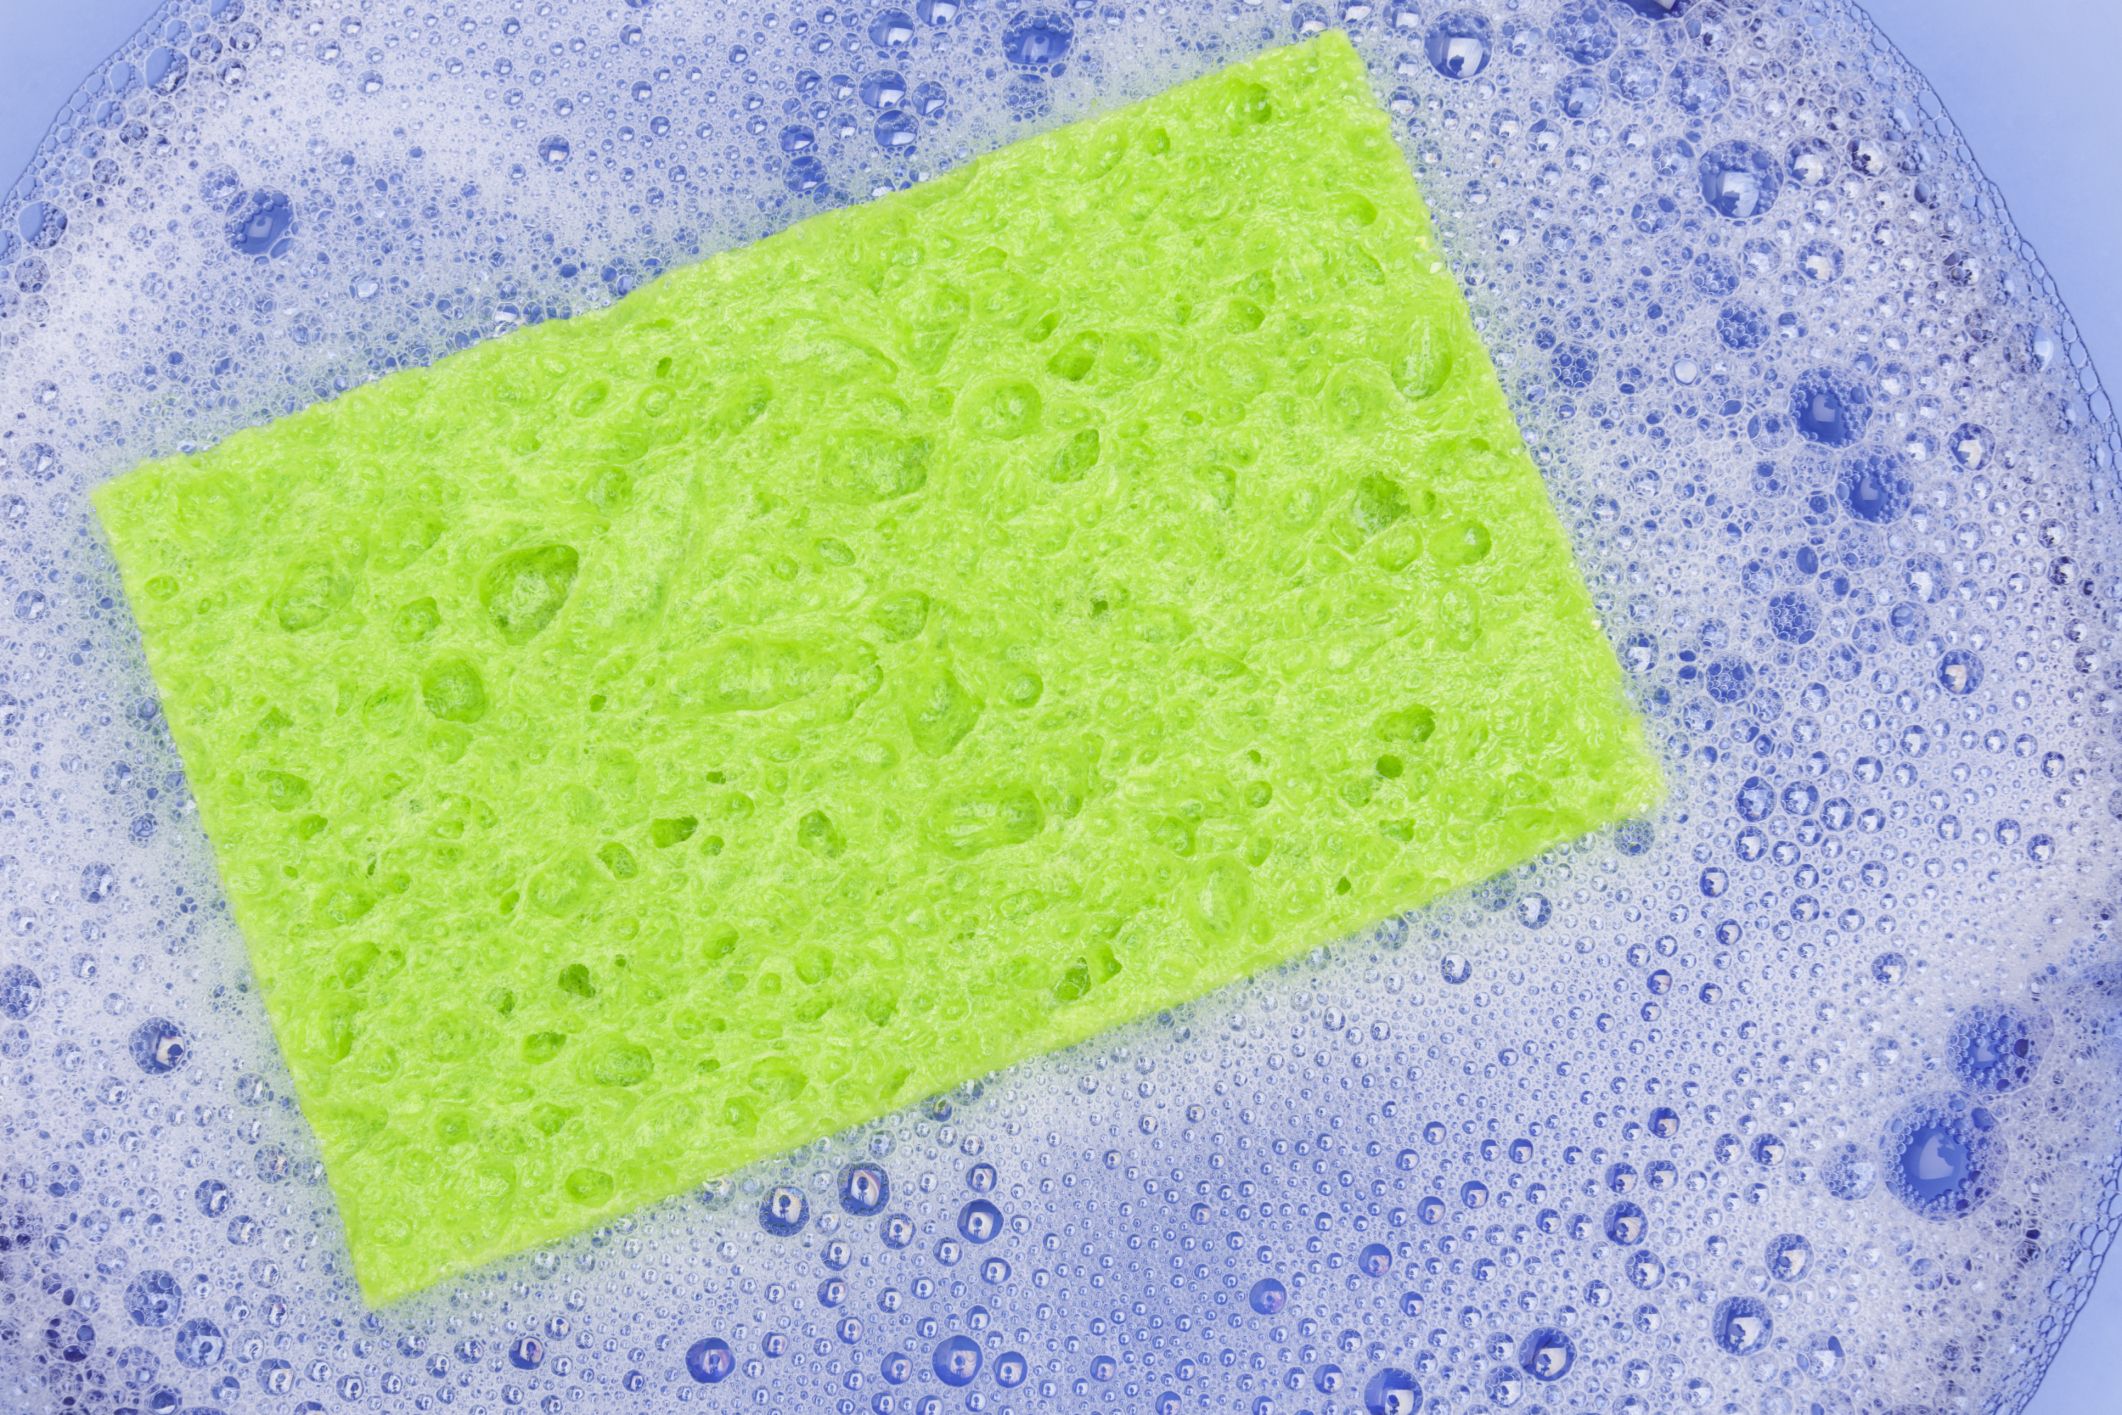 How To Clean A Sponge Tips For Sanitizing Kitchen Sponge